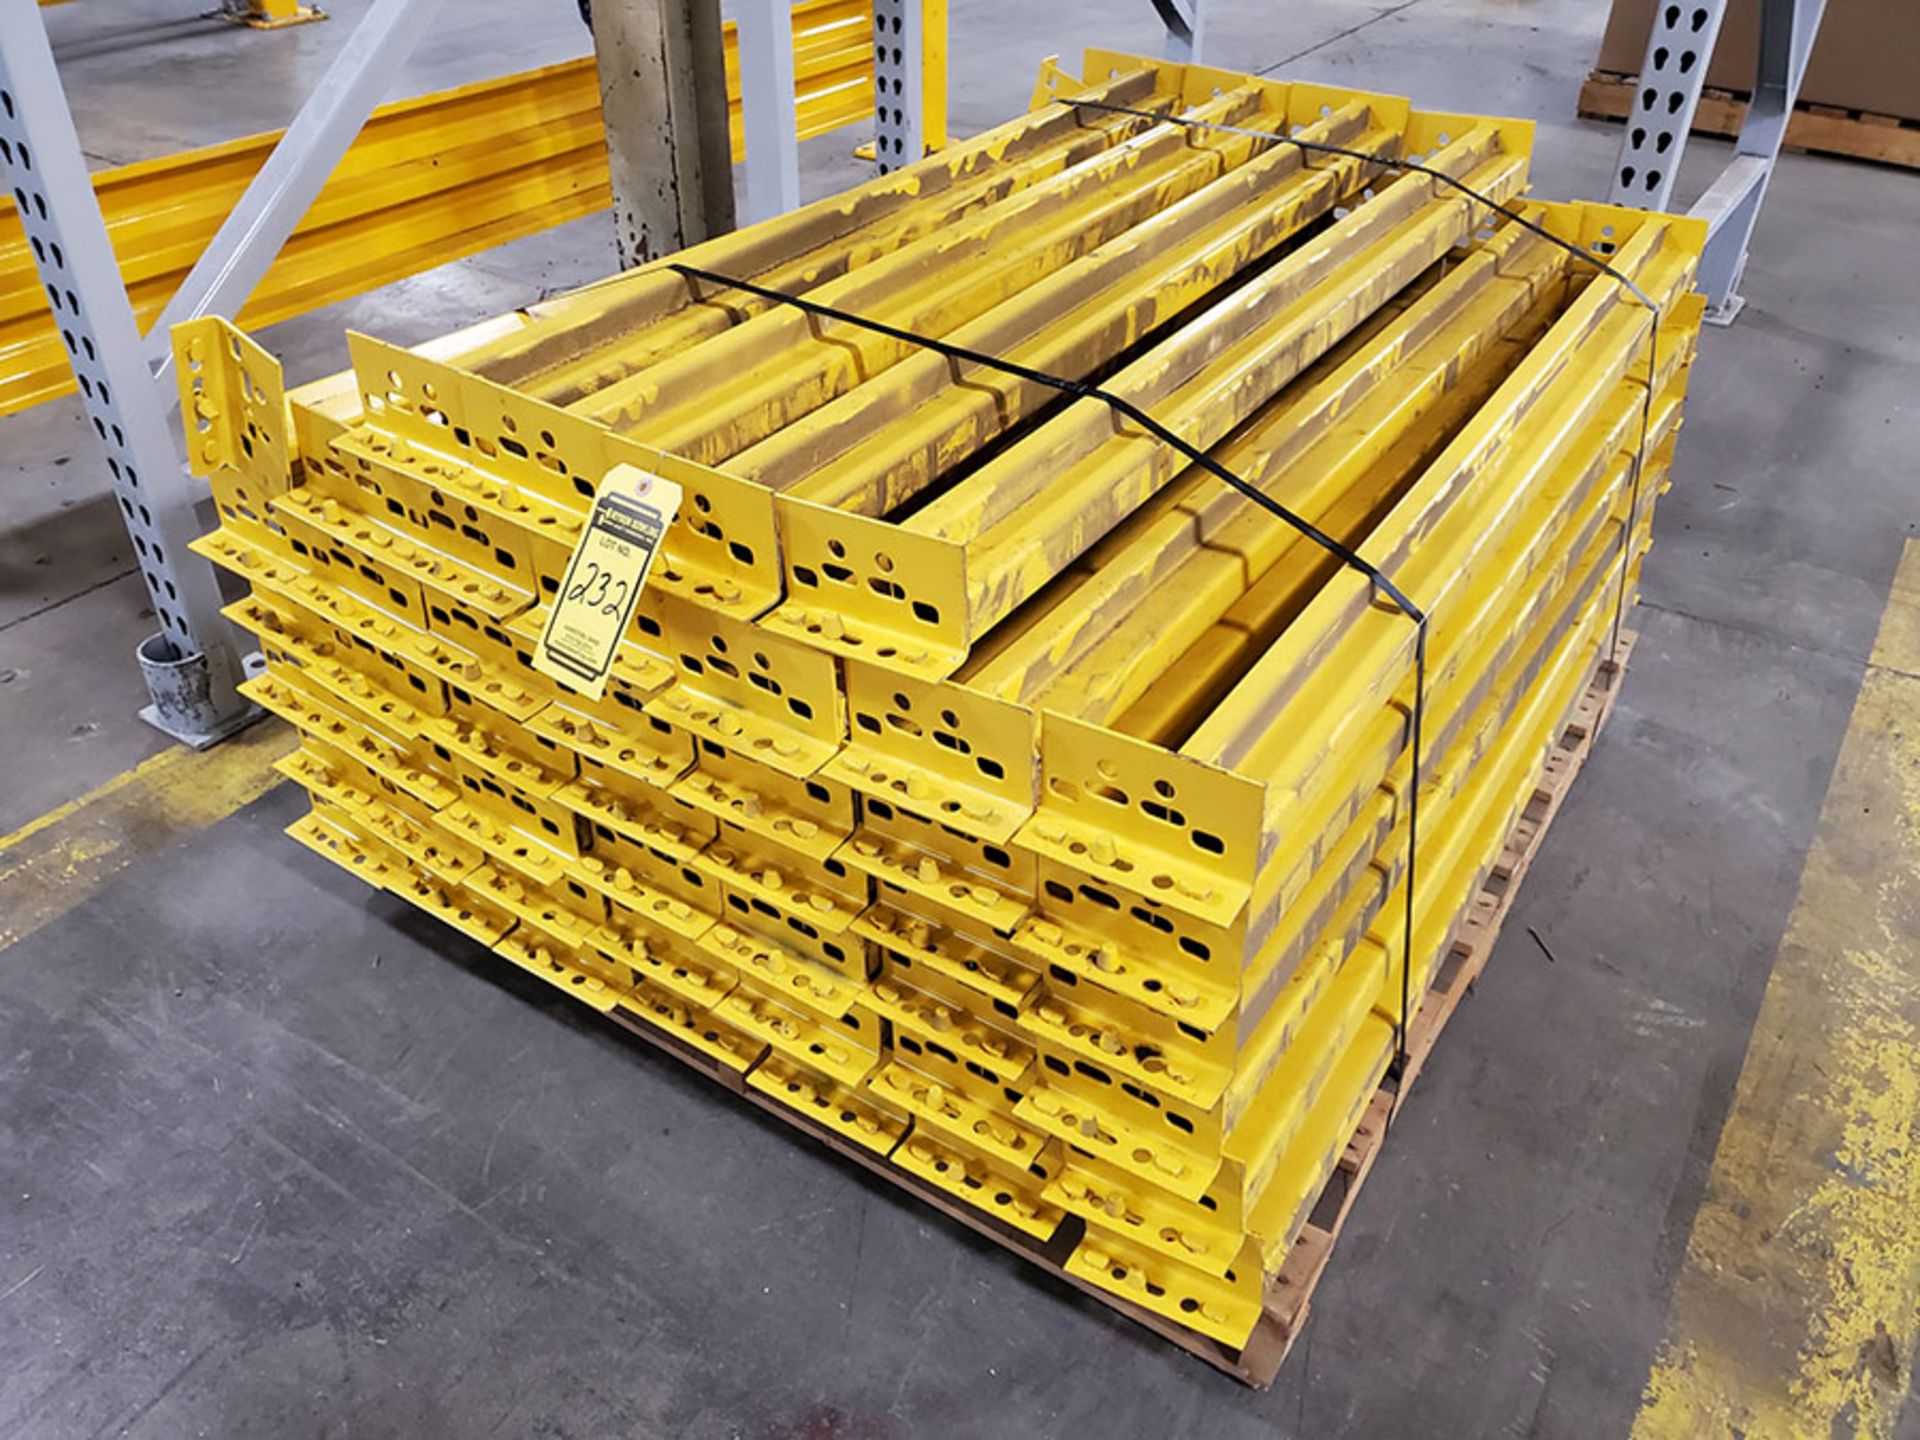 PALLET RACKING ASSEMBLED & ON THE GROUND - (14) SECTIONS TEAR DROP PALLET RACKING, 12' UPRIGHTS X - Image 11 of 19